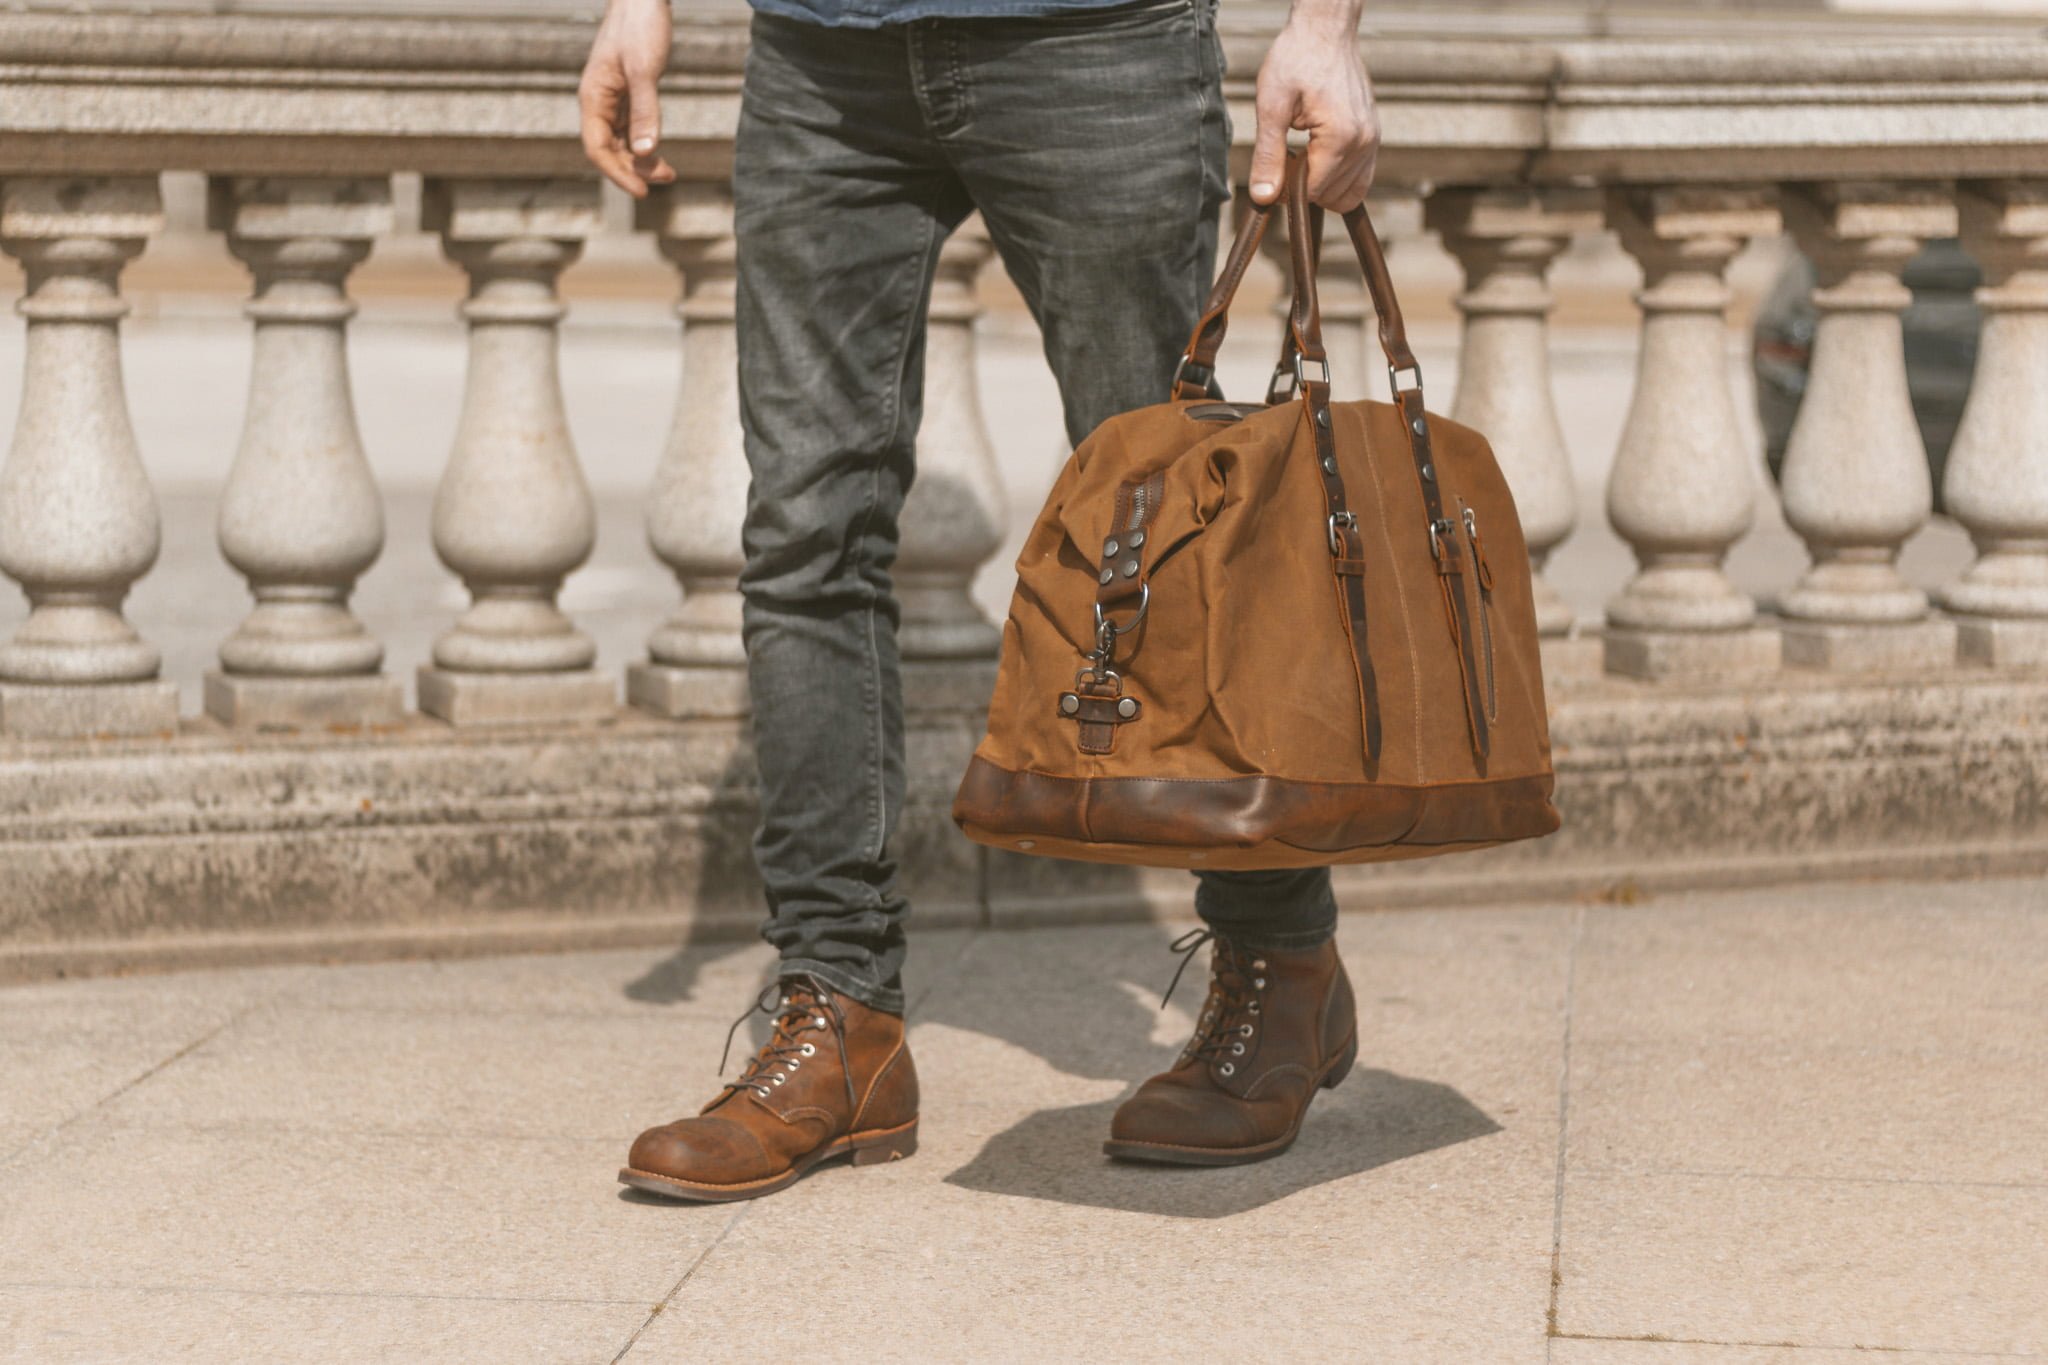 The Weekender - Waxed Canvas Leather Duffel – Western Leather